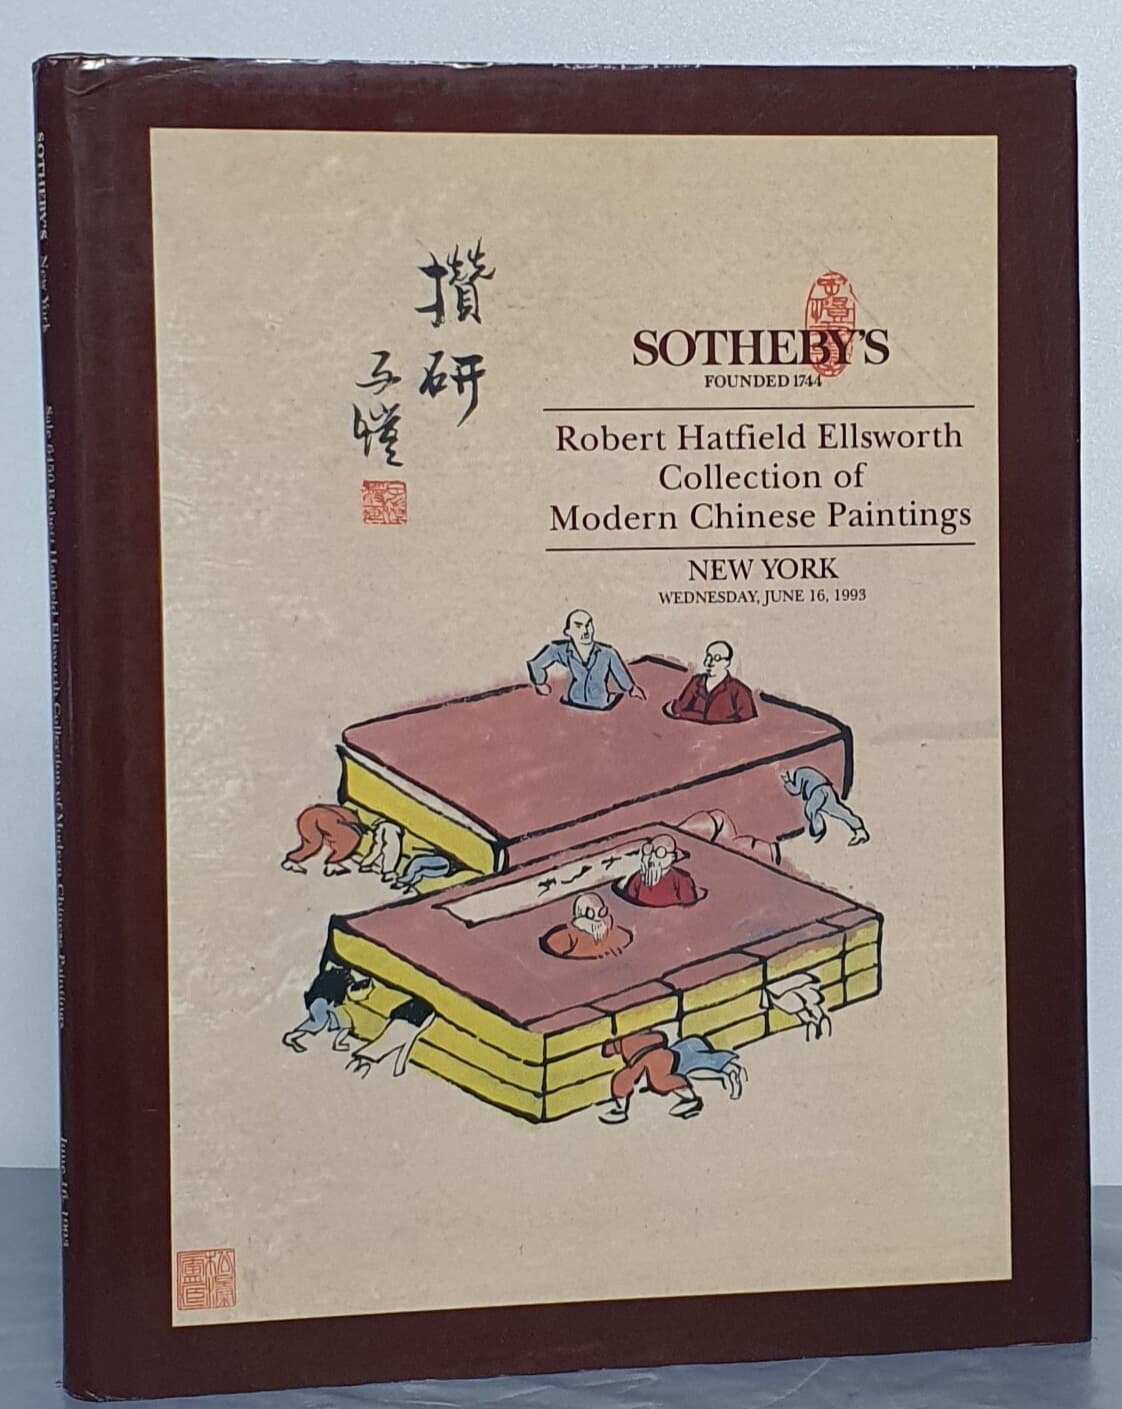 SOTHEBY'S  FOUNDED 1744- Robert Hatfield Ellsworth Collection of Modern Chinese Paintings - NEW YORK  WEDNESDAY, JINE 16,1993)